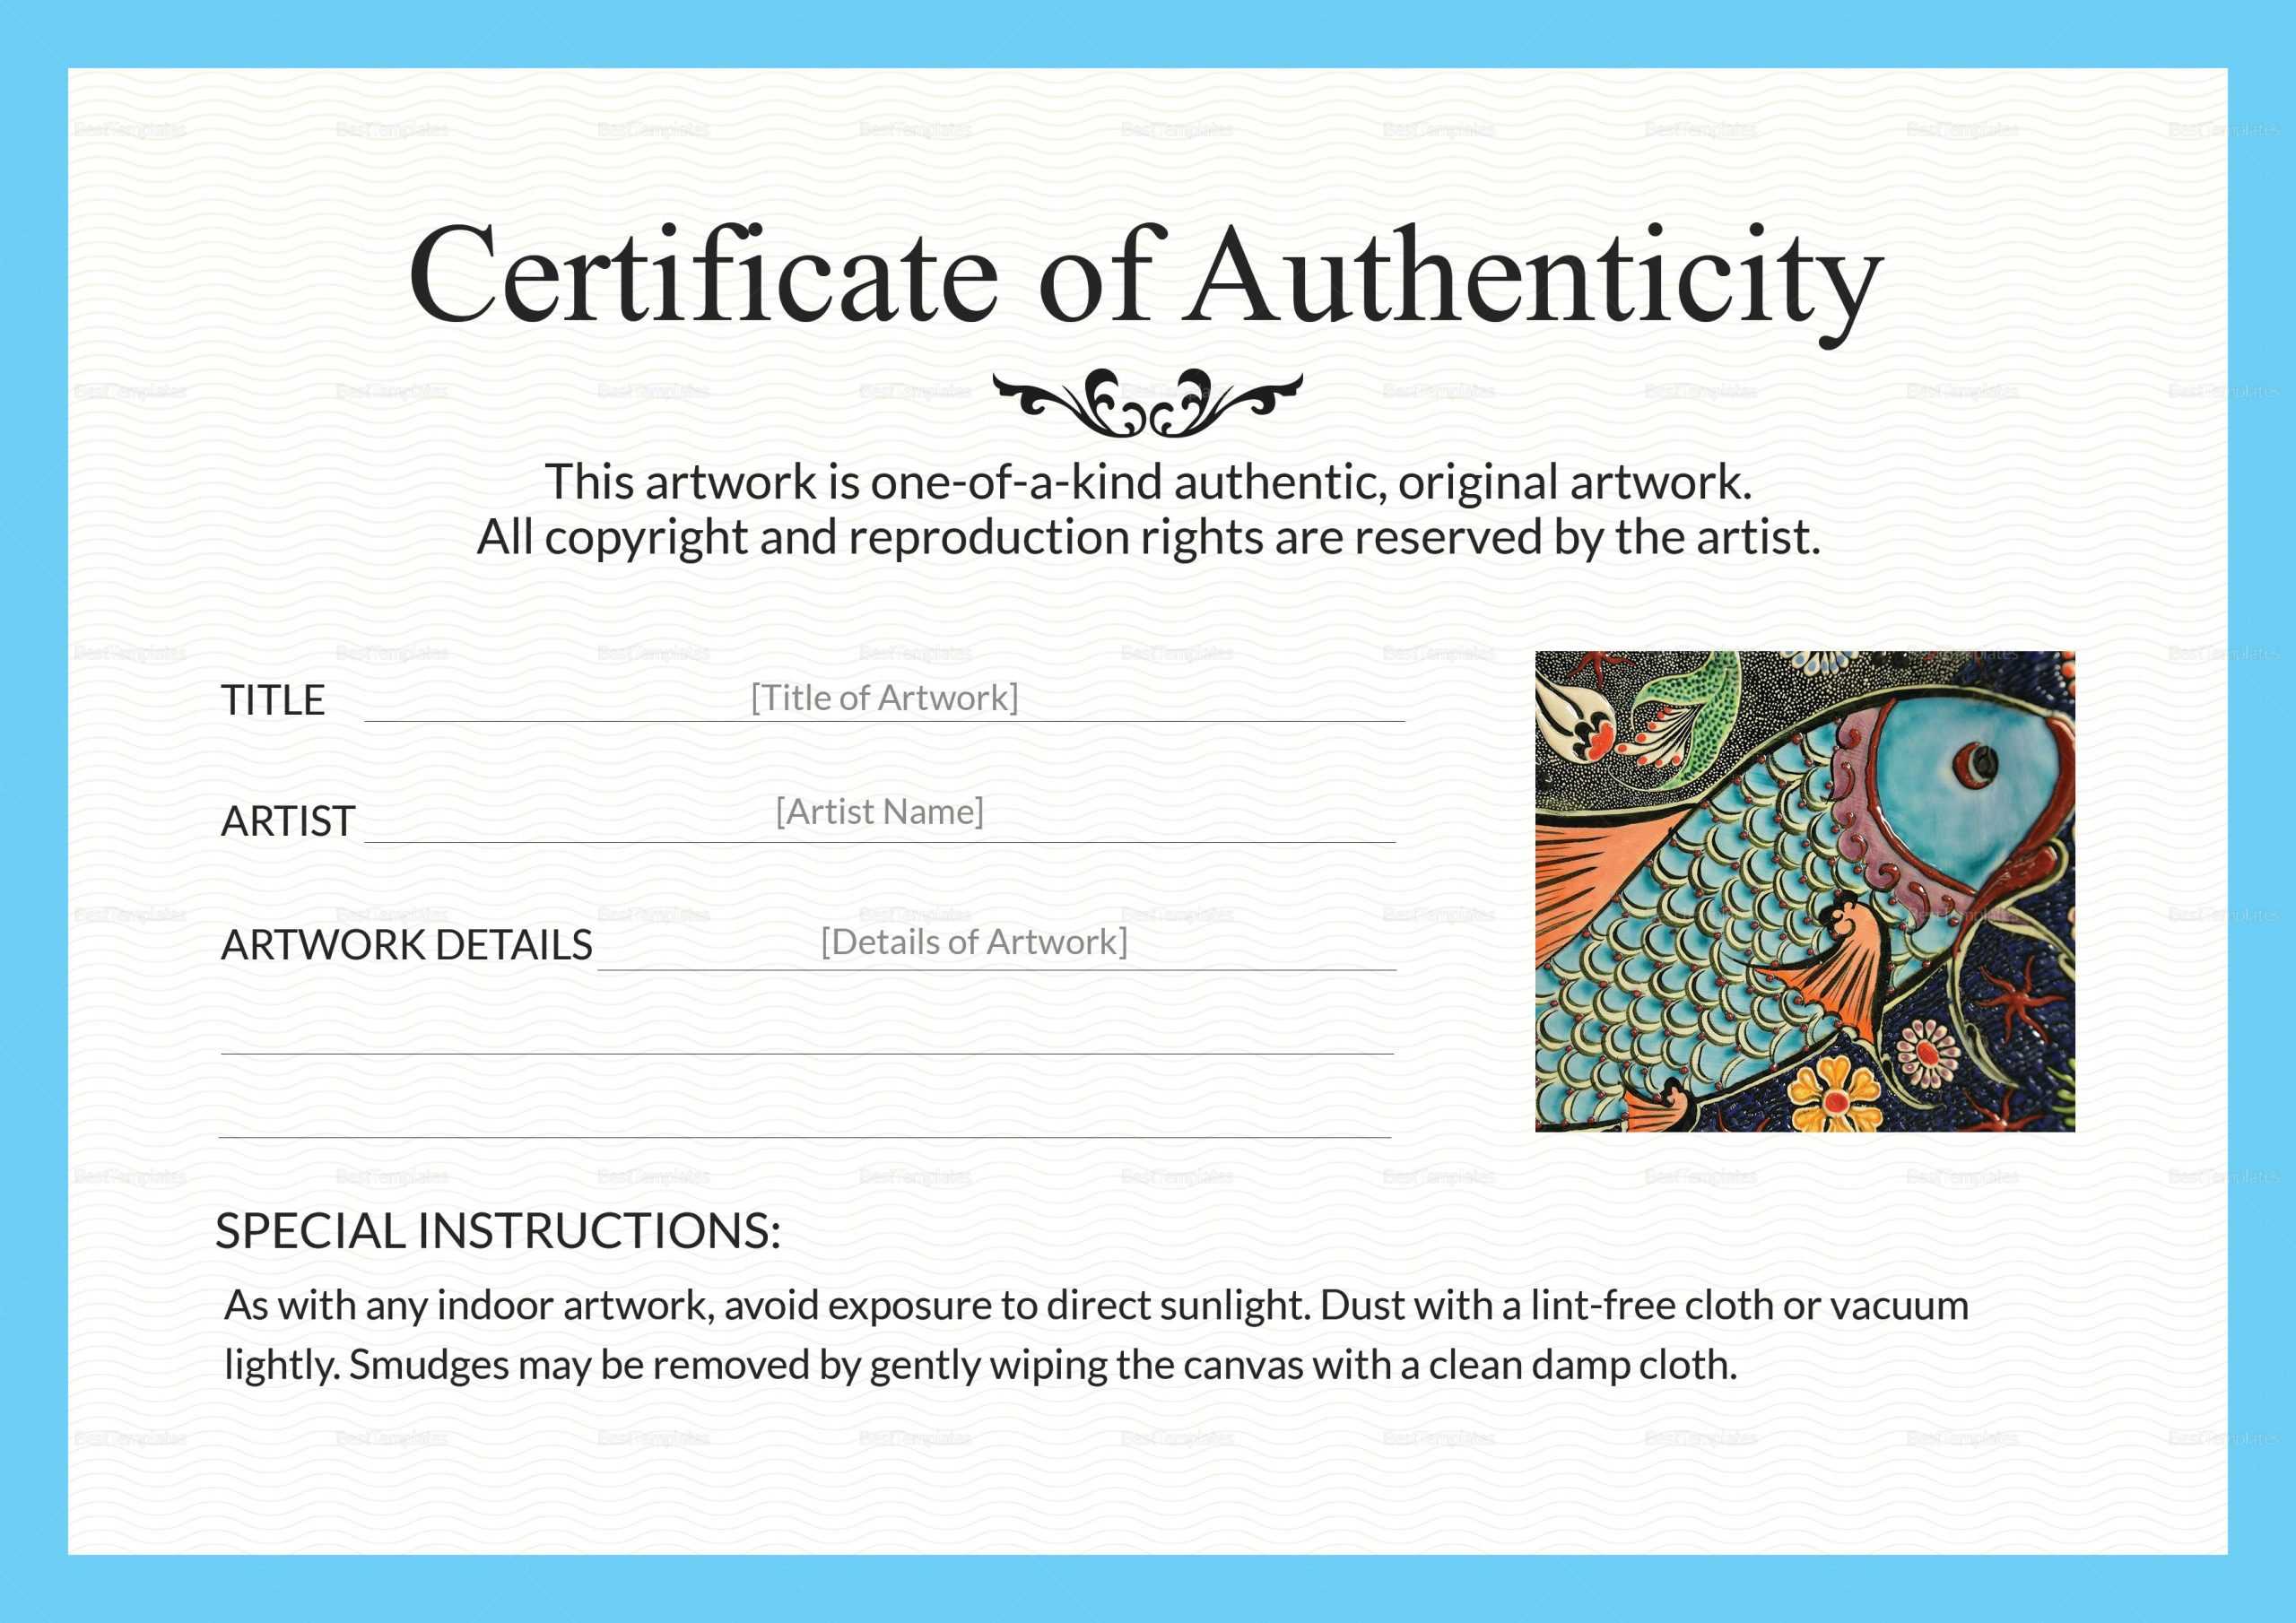 Certificate Of Authenticity Template Artwork In 2020 Art Inside Certificate Of Authenticity Template